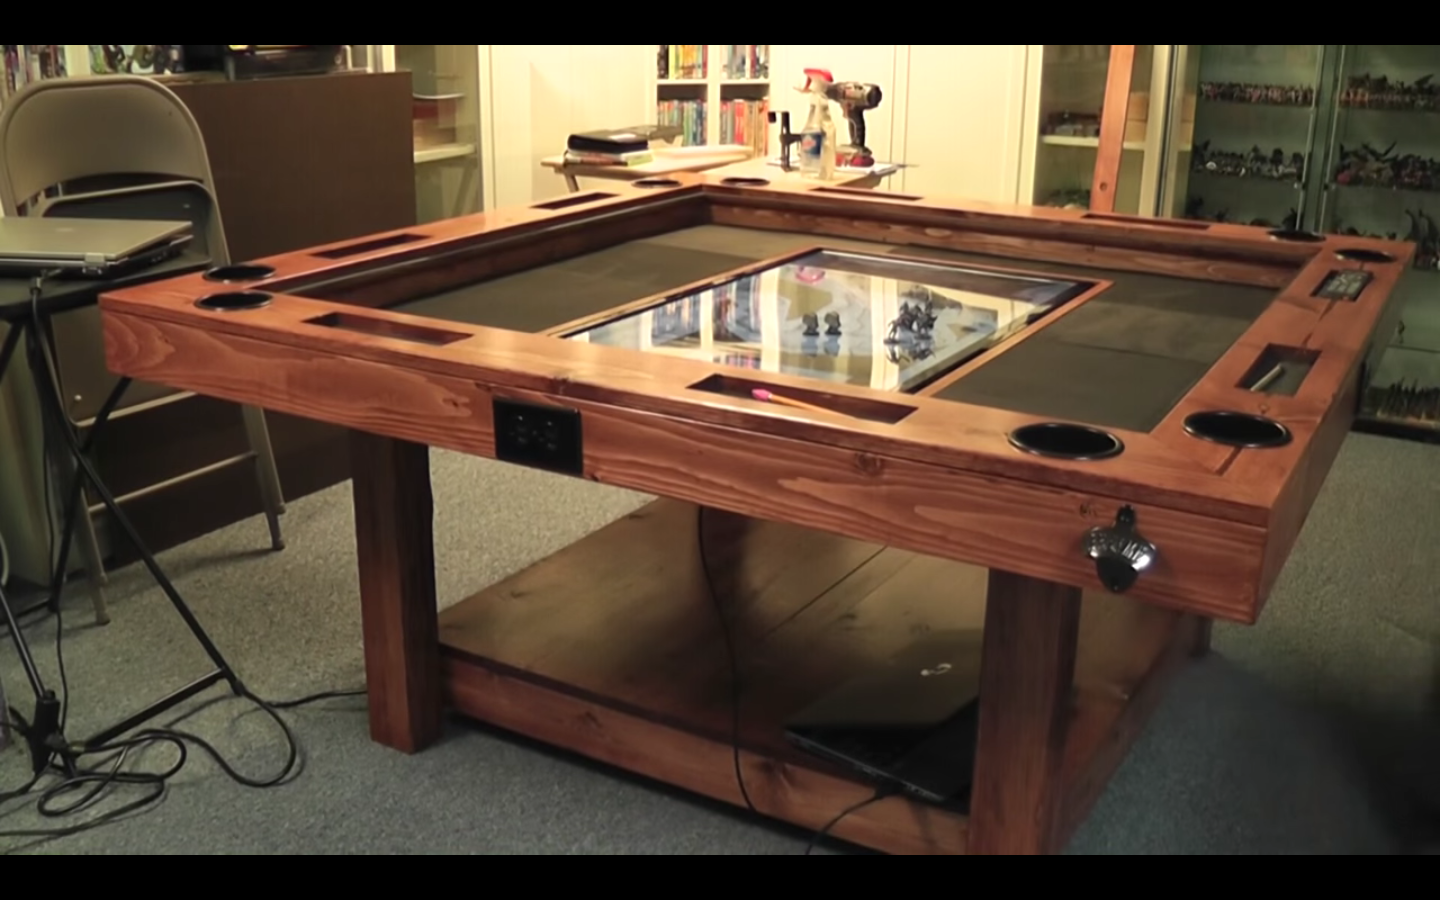 Building the Ultimate Gaming Table